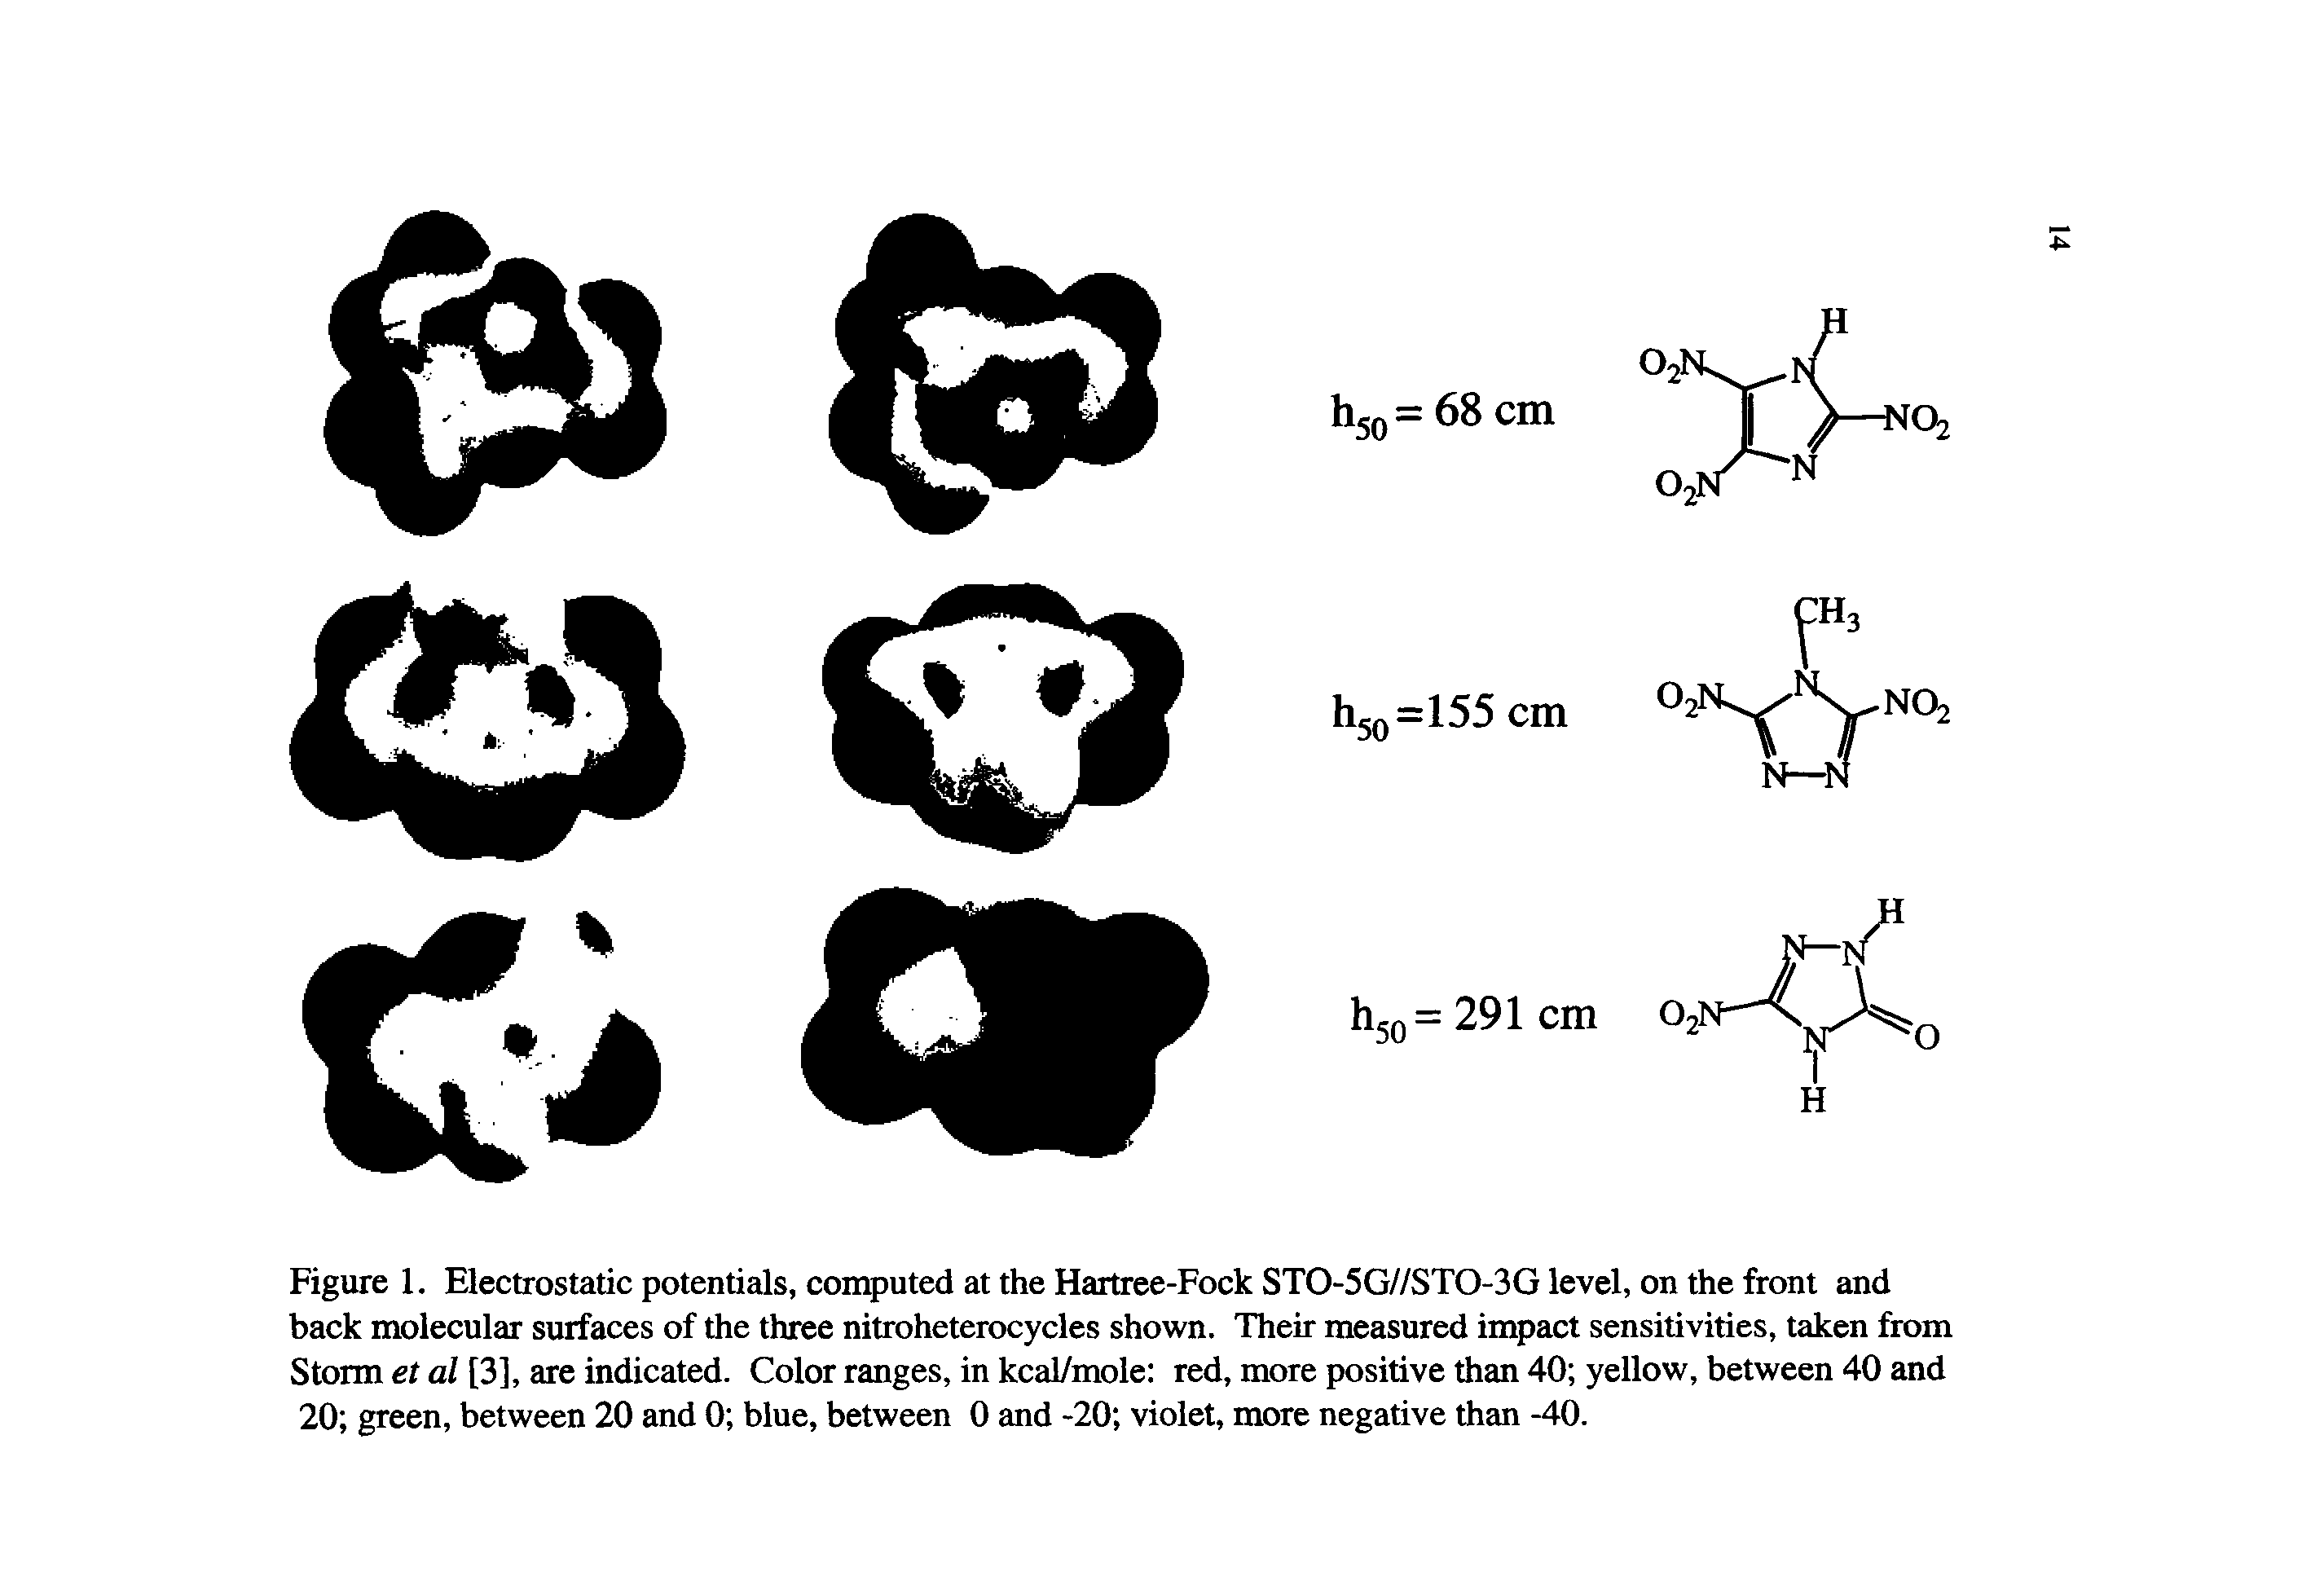 Figure 1. Electrostatic potentials, computed at the Hartree-Fock STO-5G//STO-3G level, on the front and back molecular surfaces of the three nitroheterocycles shown. Their measured impact sensitivities, taken from Storm et al [3], are indicated. Color ranges, in kcal/mole red, more positive than 40 yellow, between 40 and 20 green, between 20 and 0 blue, between 0 and -20 violet, more negative than -40.